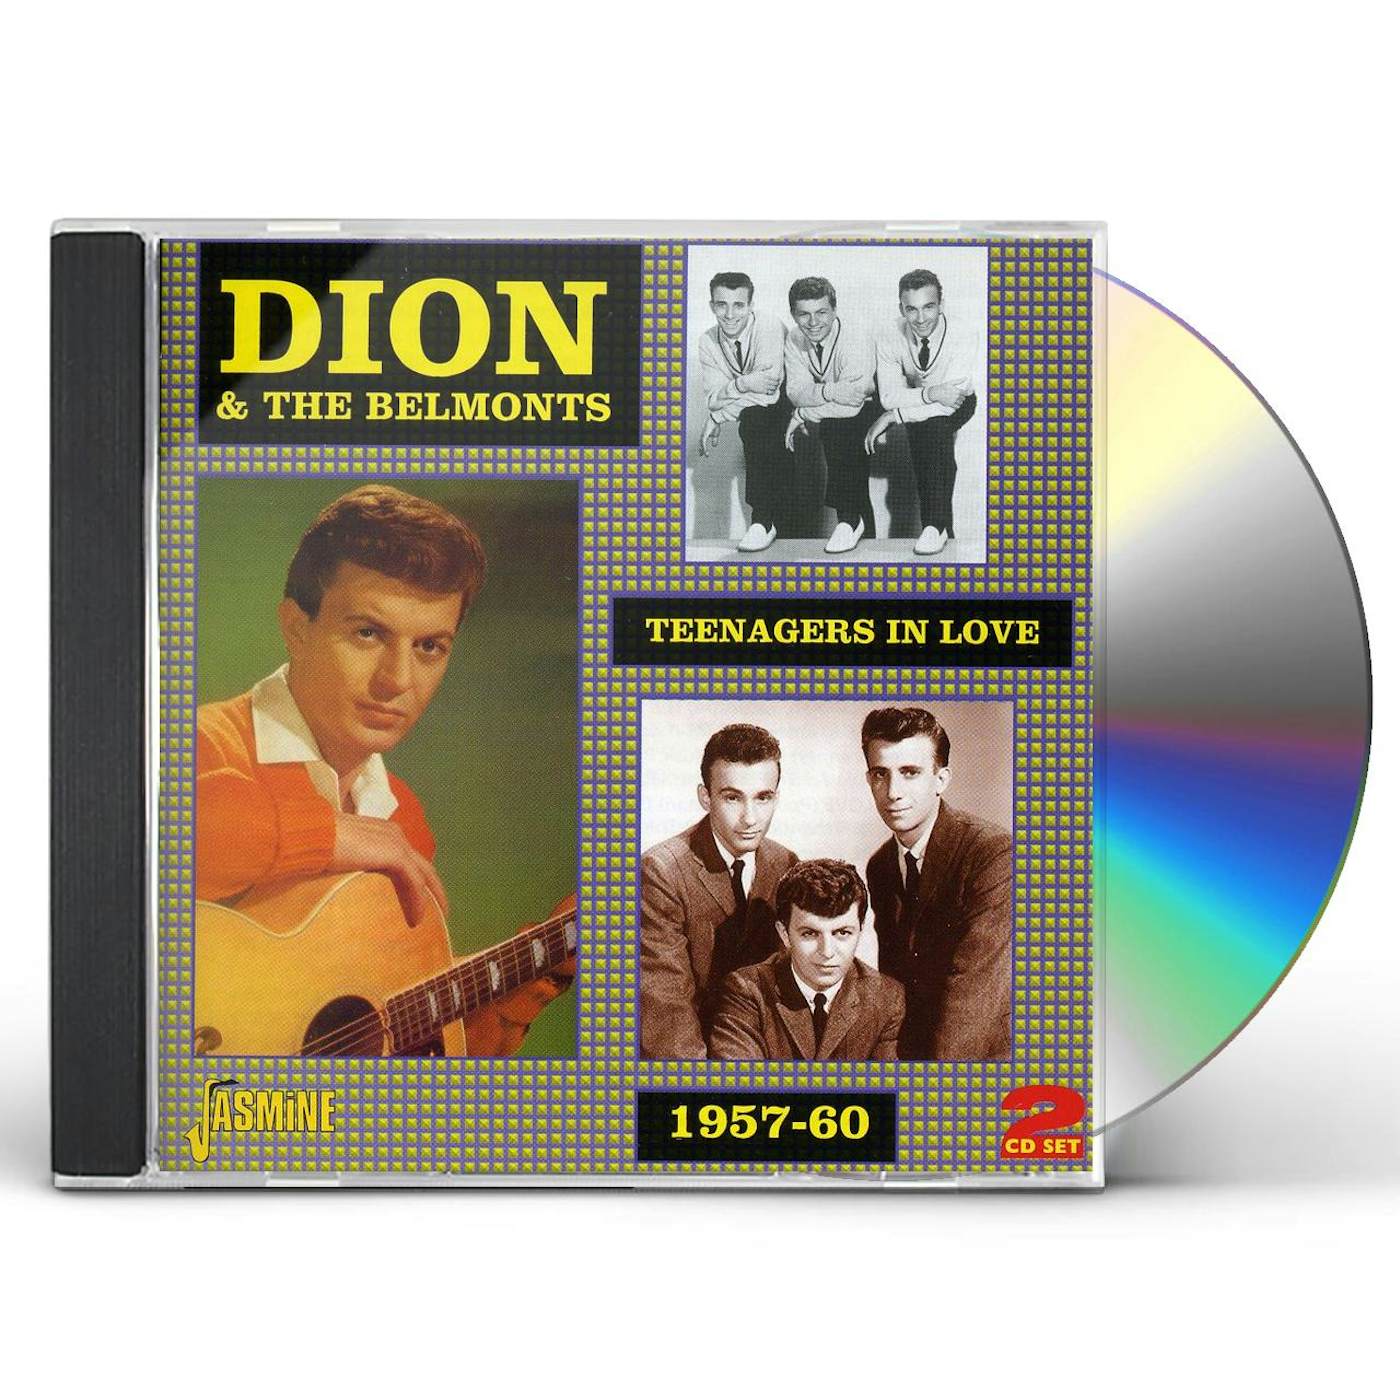 Dion & The Belmonts COMPLETE HITS 1957-60 CD